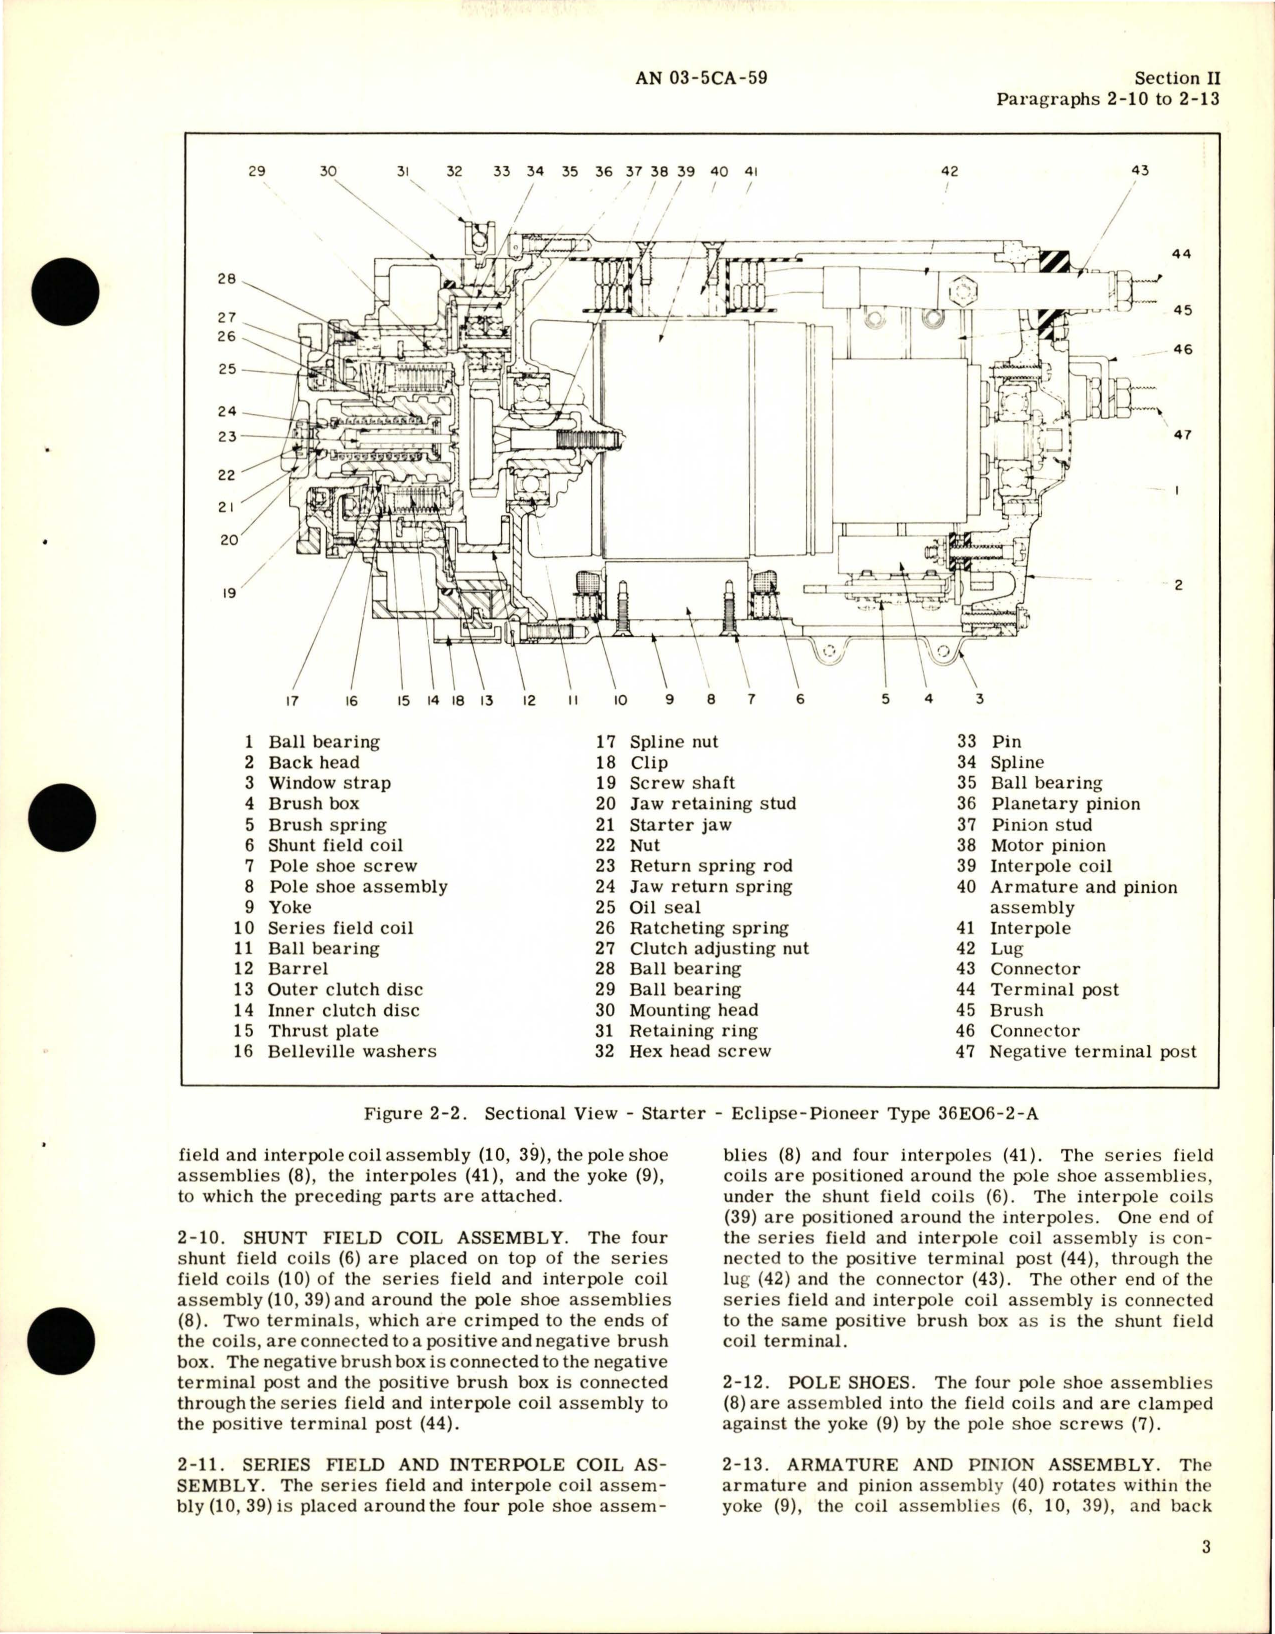 Sample page 7 from AirCorps Library document: Operation and Service Instructions for Starters - Models 36E04-6-A, 36E06-2-A, 36E09-2-B